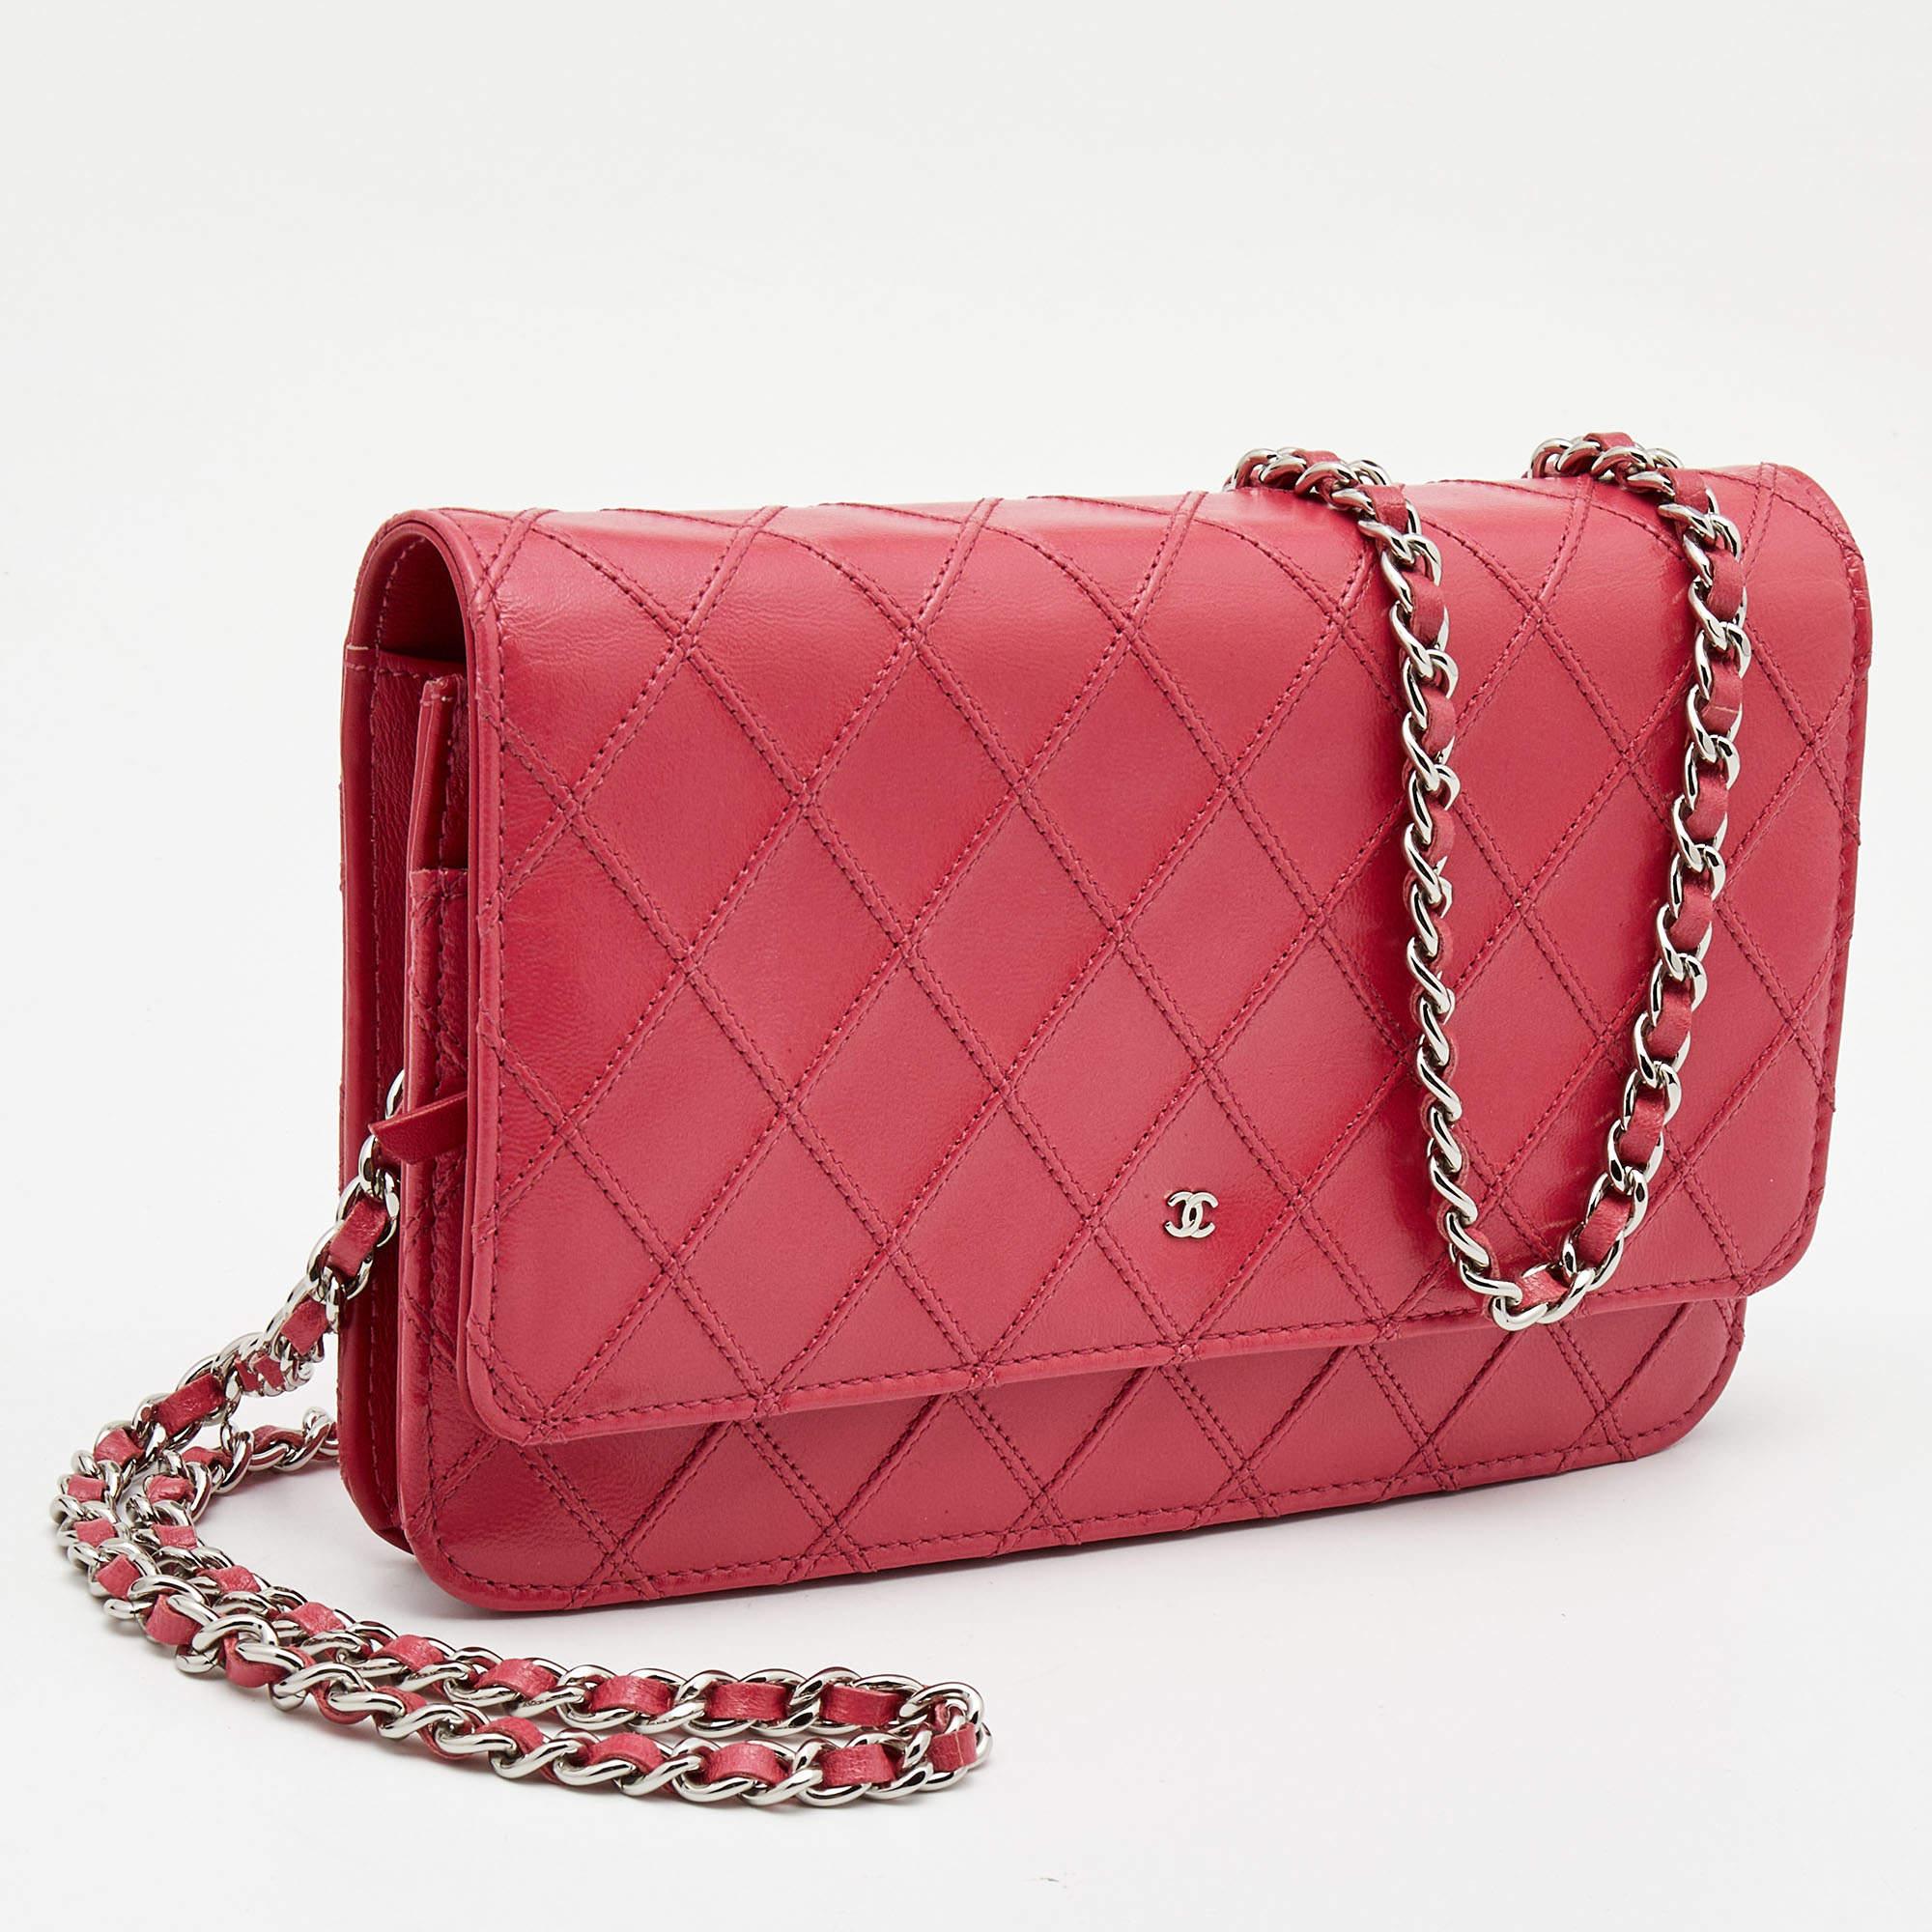 Crafted with precision from patent leather and touched with subtle red shade, this WOC clutch bag from Chanel cannot get any more luxurious than it already is! Bags from the brand are iconic and monumental in the history of fashion, and this